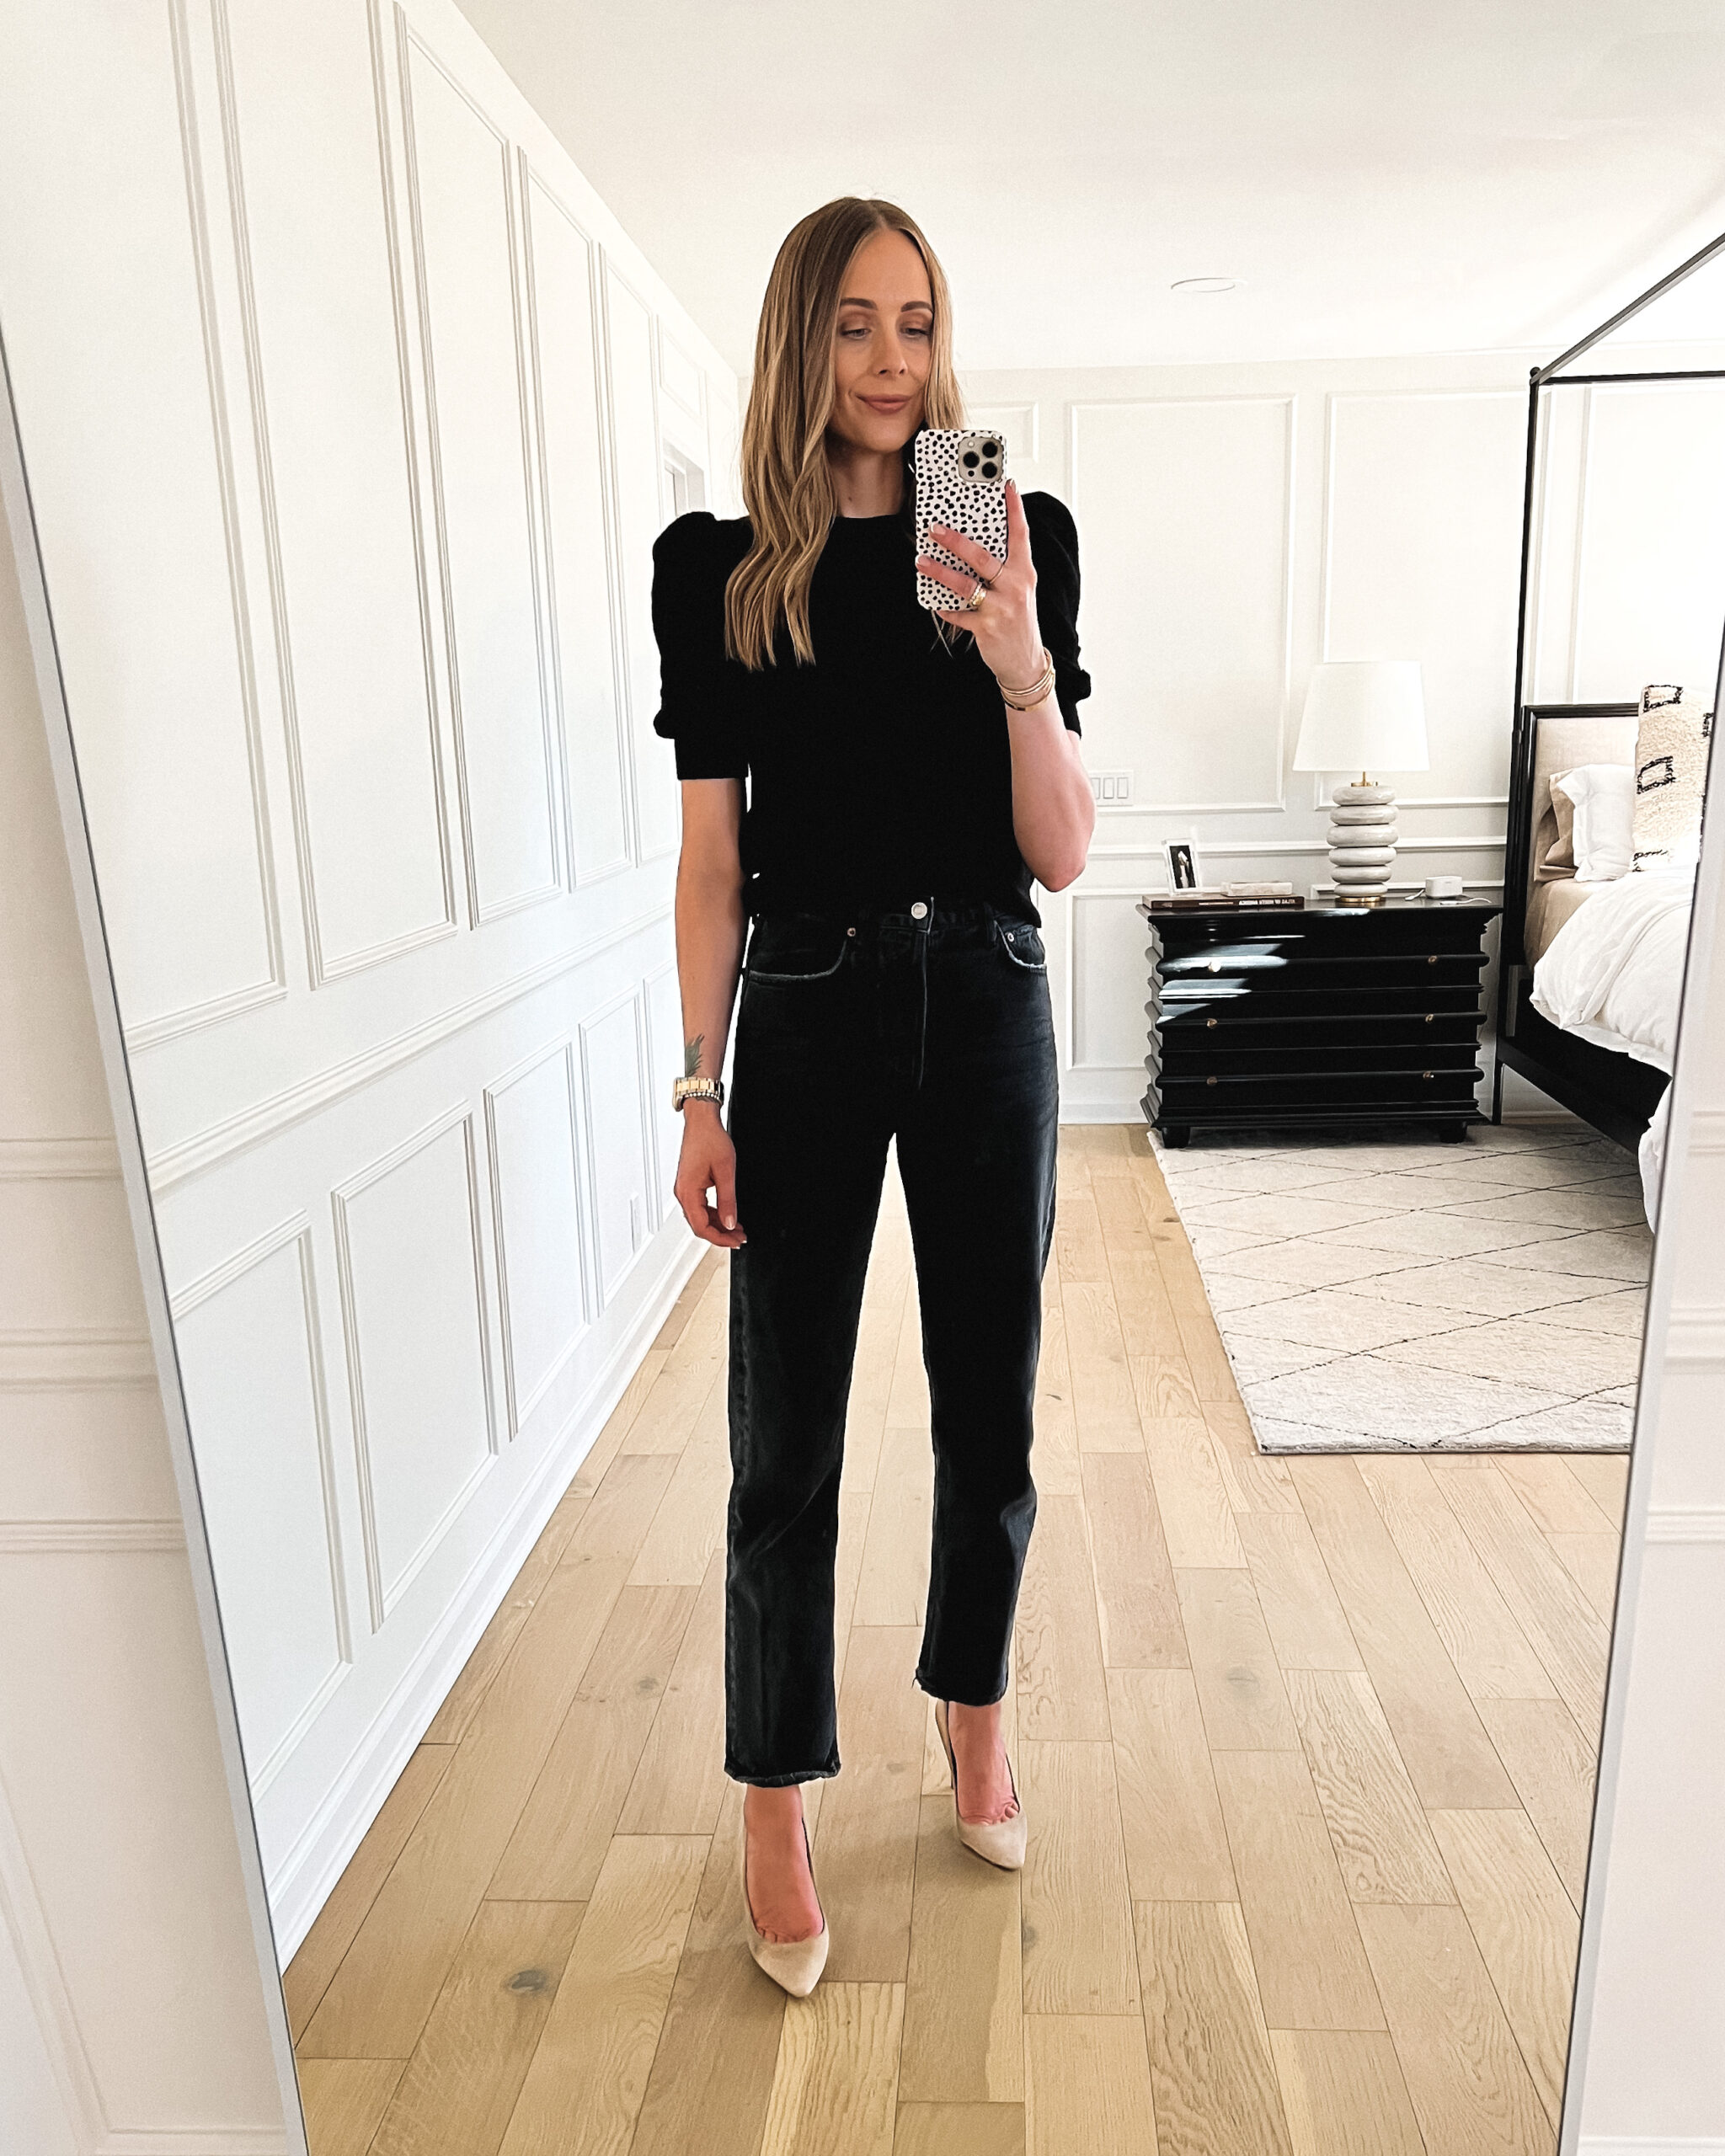 Fashion Jackson Wearing Black Puff Sleeve Top Black AGOLDE 90s Pinch Waist Jeans Review